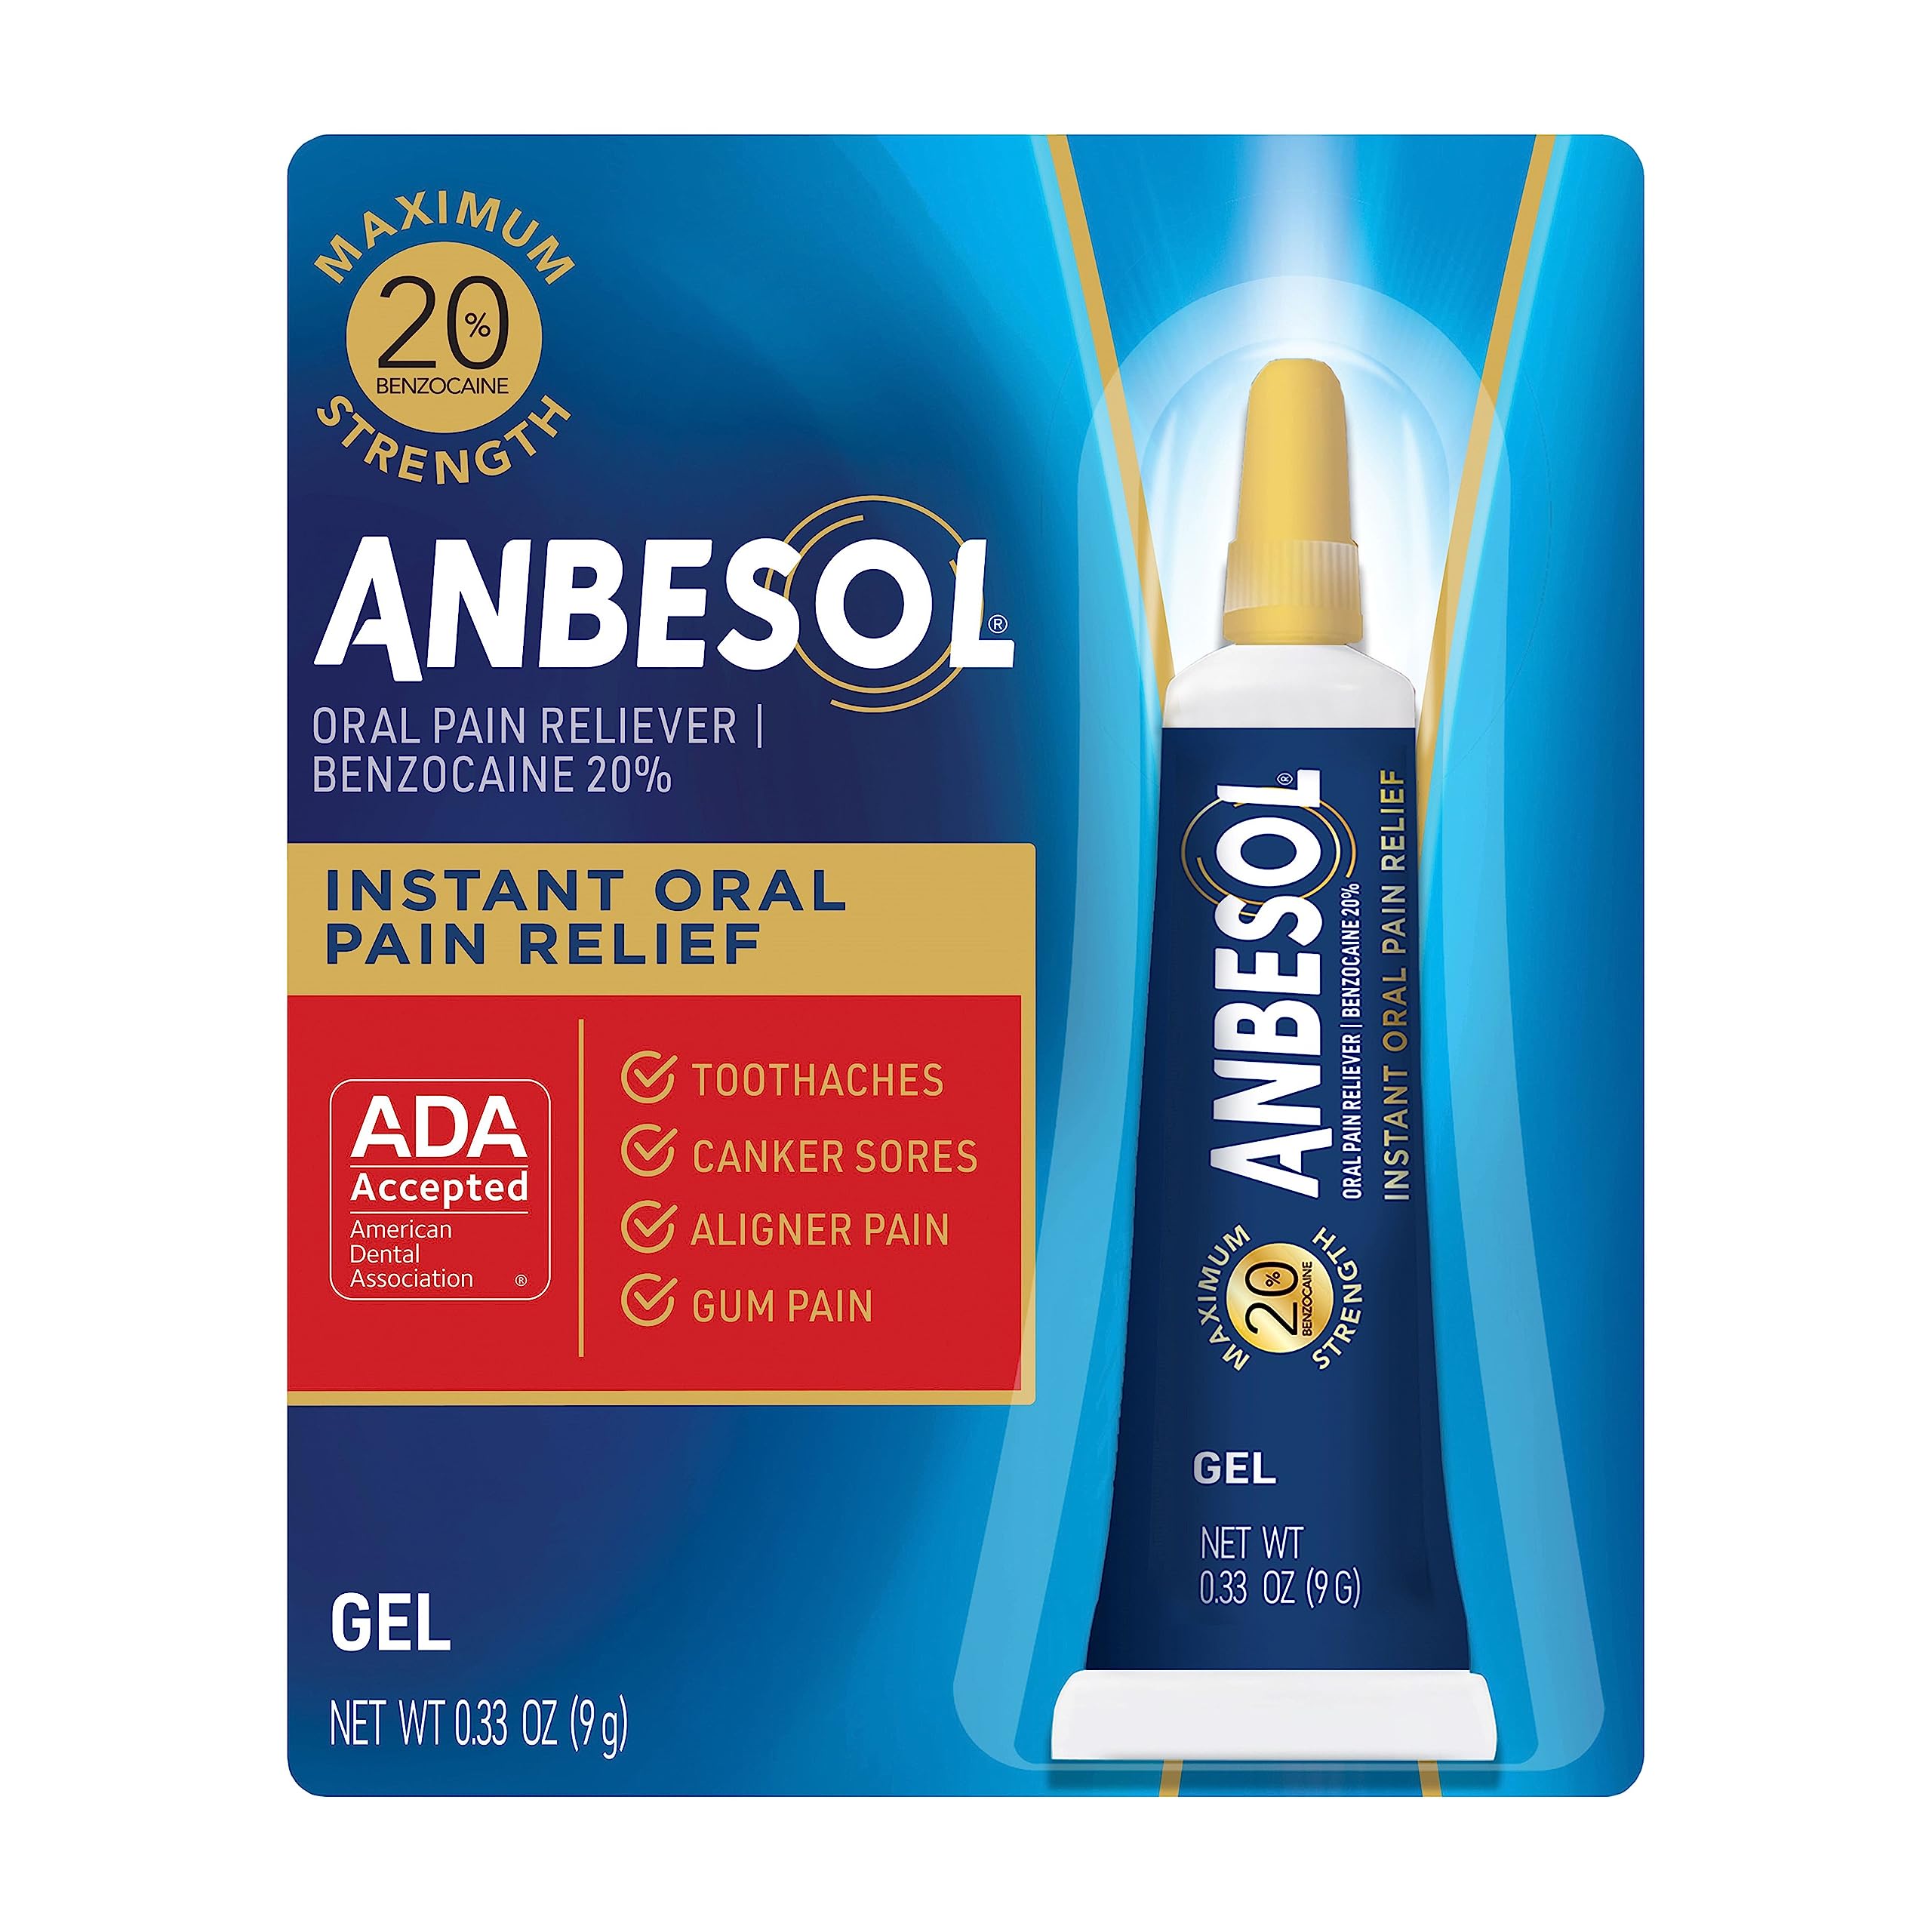 Anbesol Maximum Strength Oral Pain Relief Gel